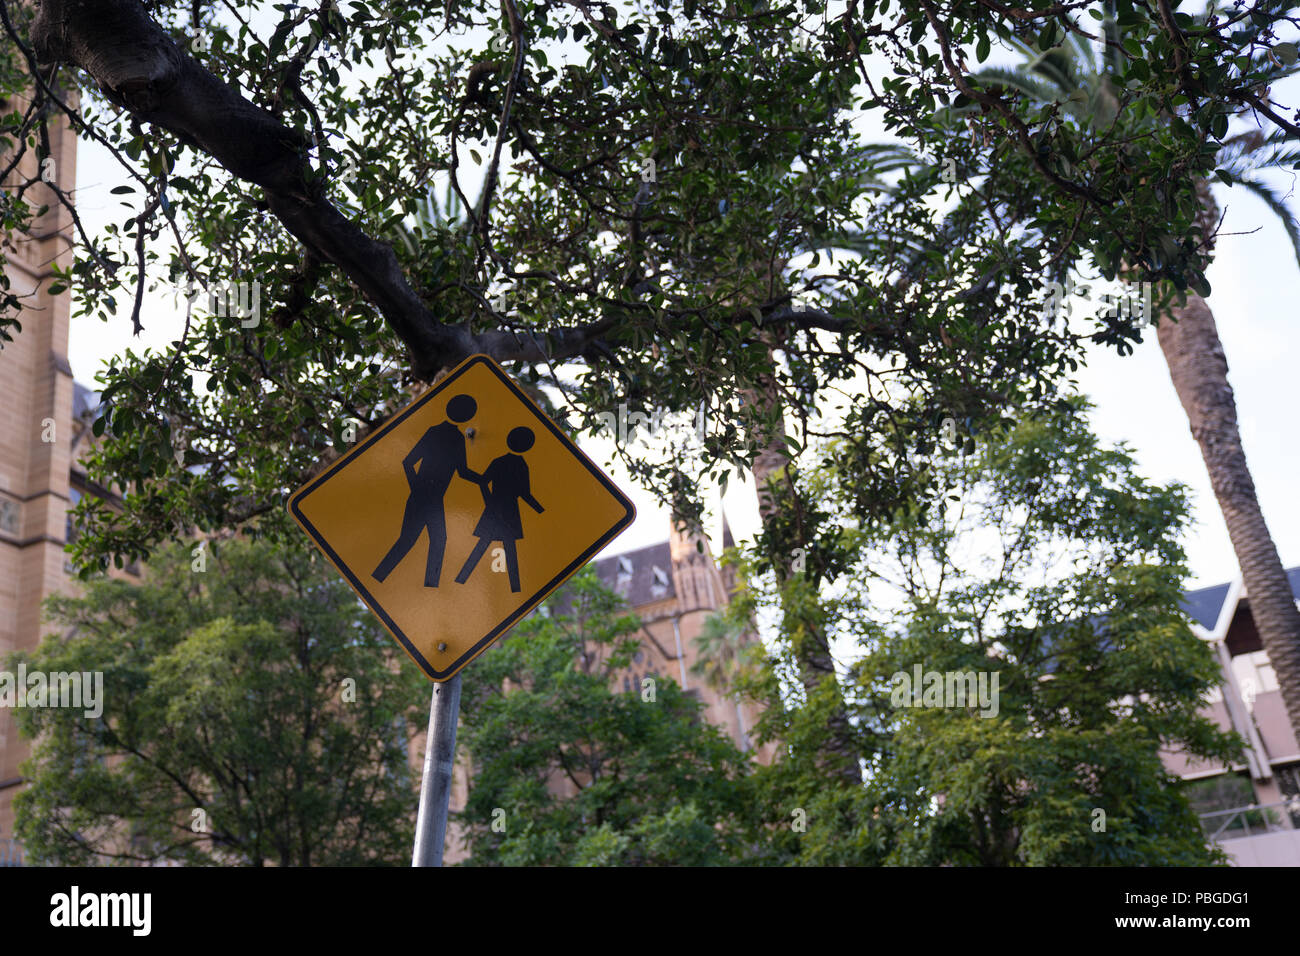 school zone, Beware of people or children crossing the street, Road symbol signs in park Stock Photo